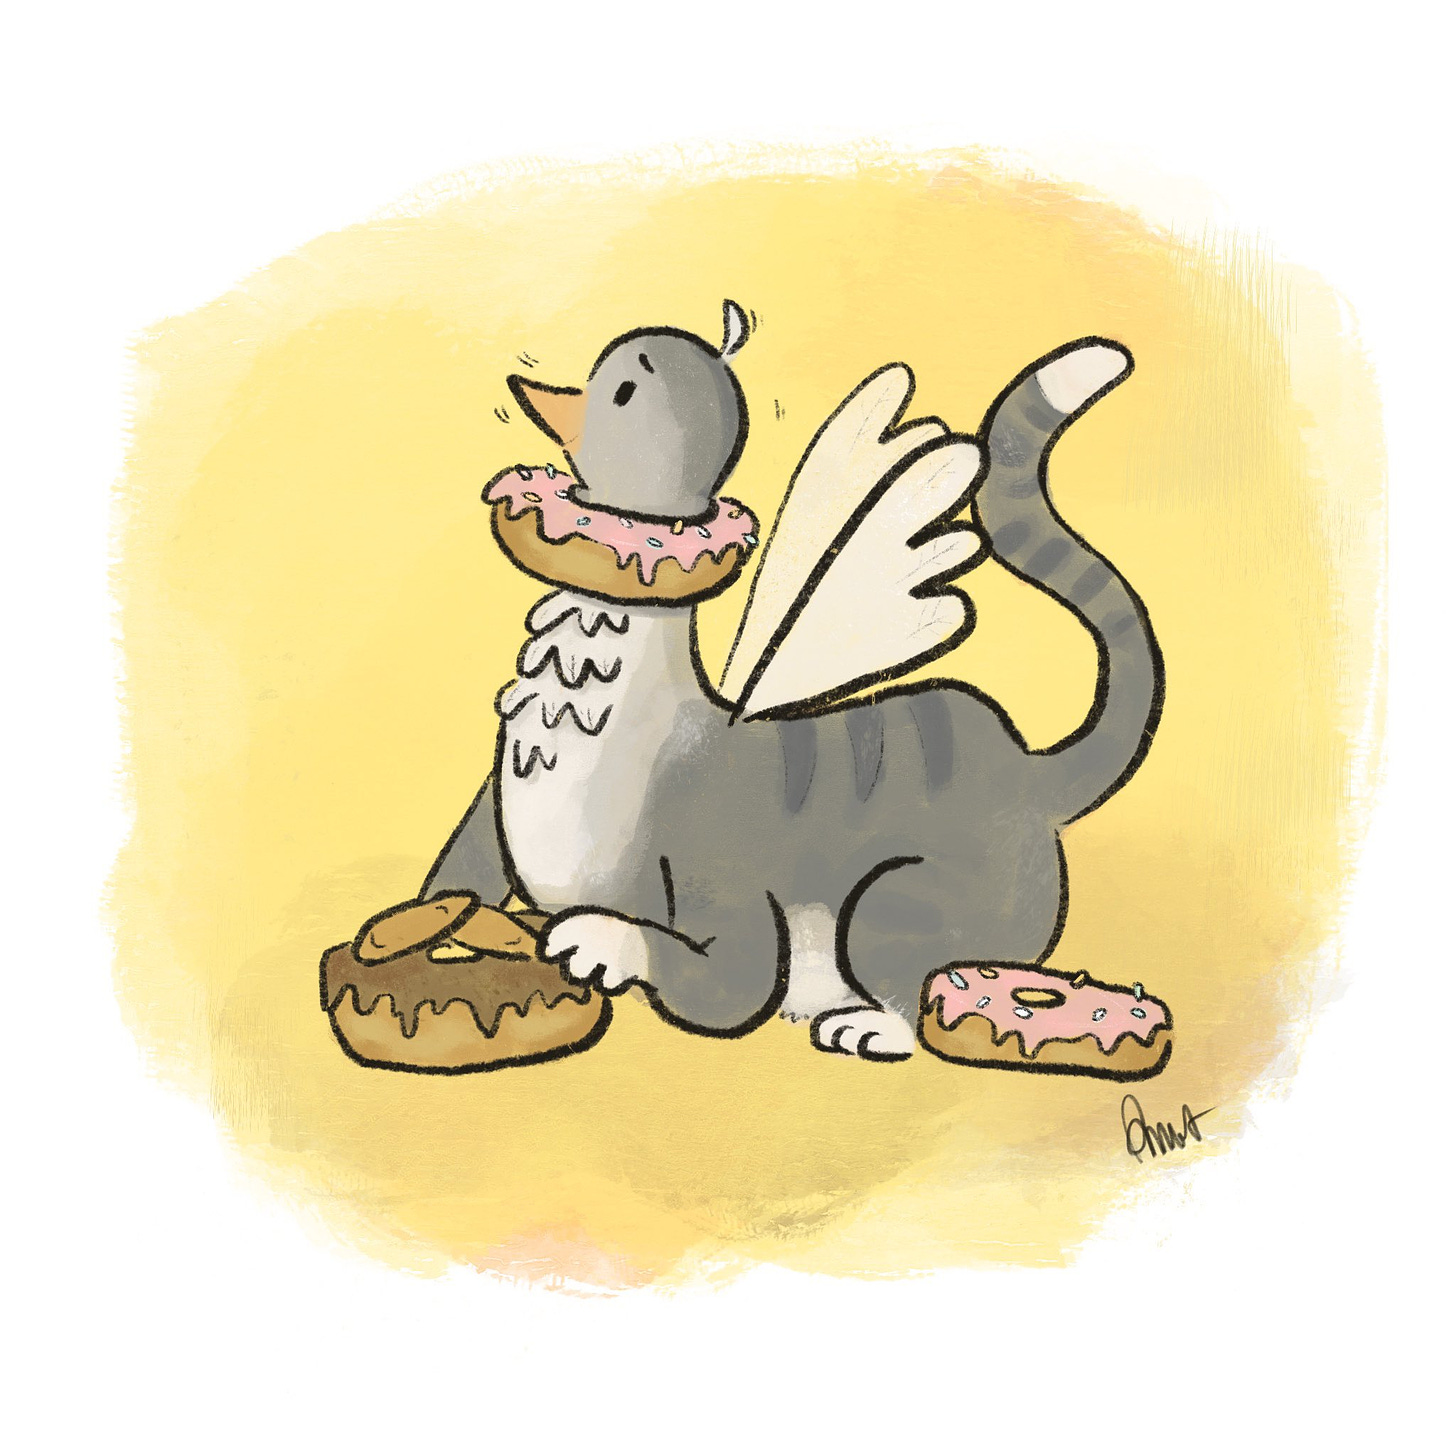 An illustration of a grey tabby griffin (cat body, pigeon head and white wings) with a donut stuck on his neck. He also has a donut under his paw for later.